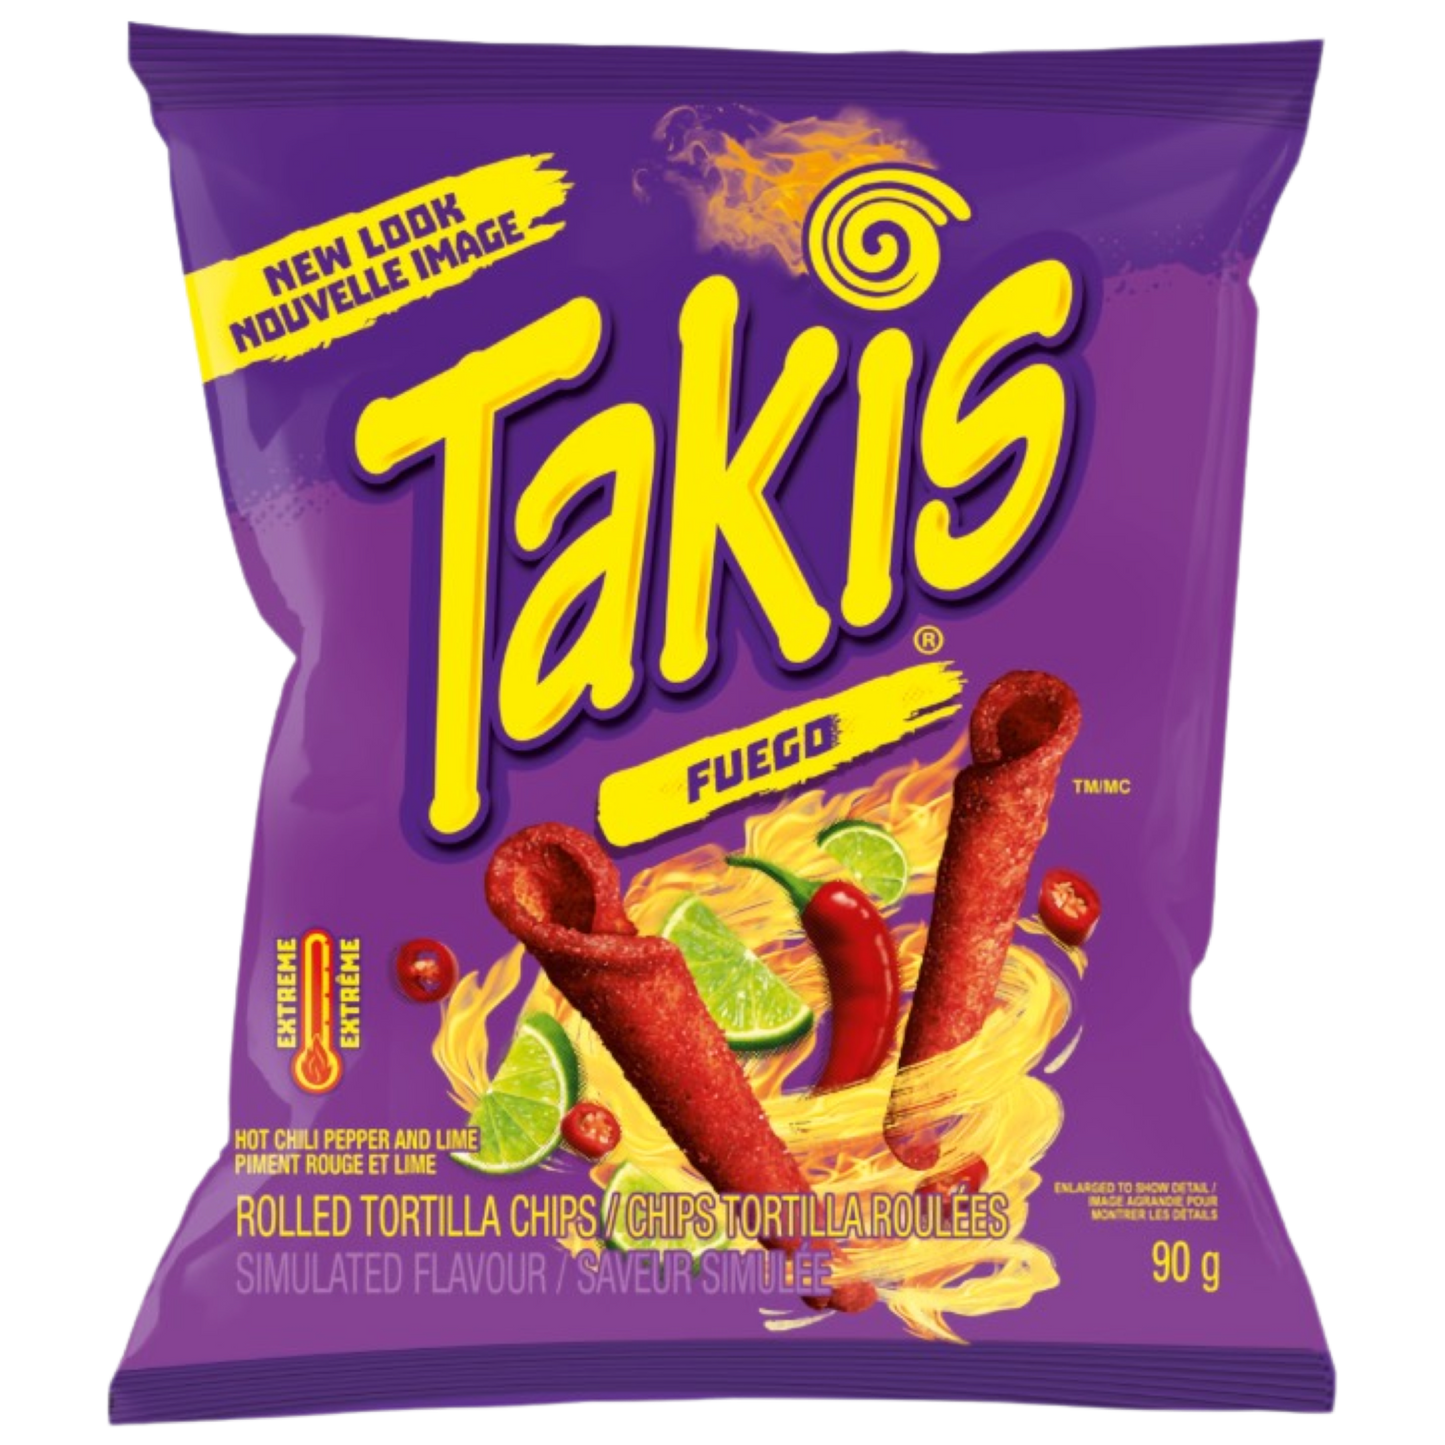 PAST BBD Takis Fuego Rolled Tortilla Corn Chips - Large Bag (113g)